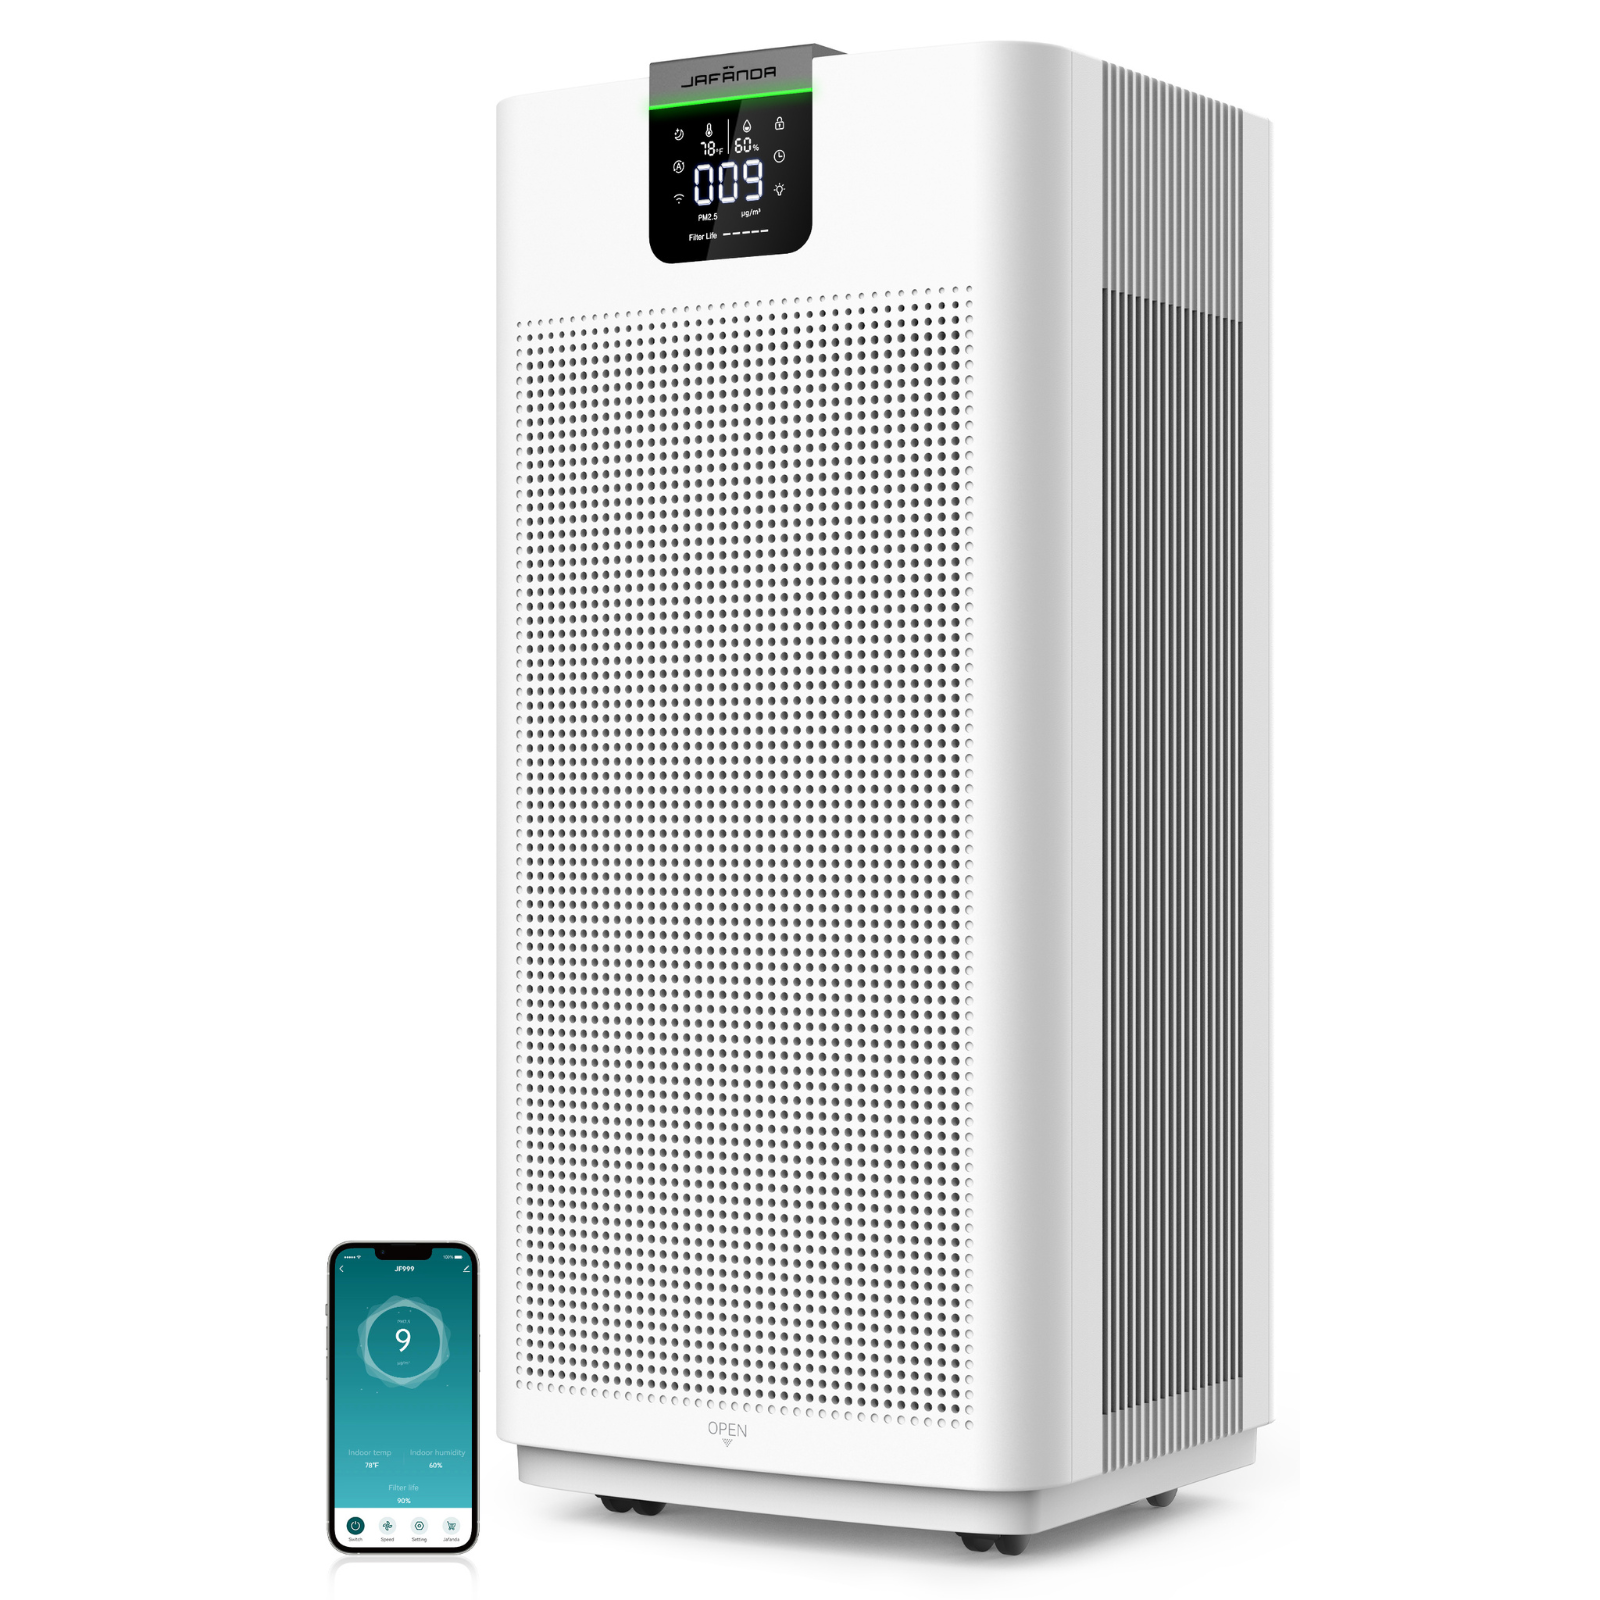 Jafanda JF999 H13 True HEPA Large Air Purifier for Whole Home and Commercial Spaces – Quiet, 3-Stage Filtration, Removes 99.97% of Smoke, Dust, Pollen, Mold Spores, and Pet Dander - Jafanda